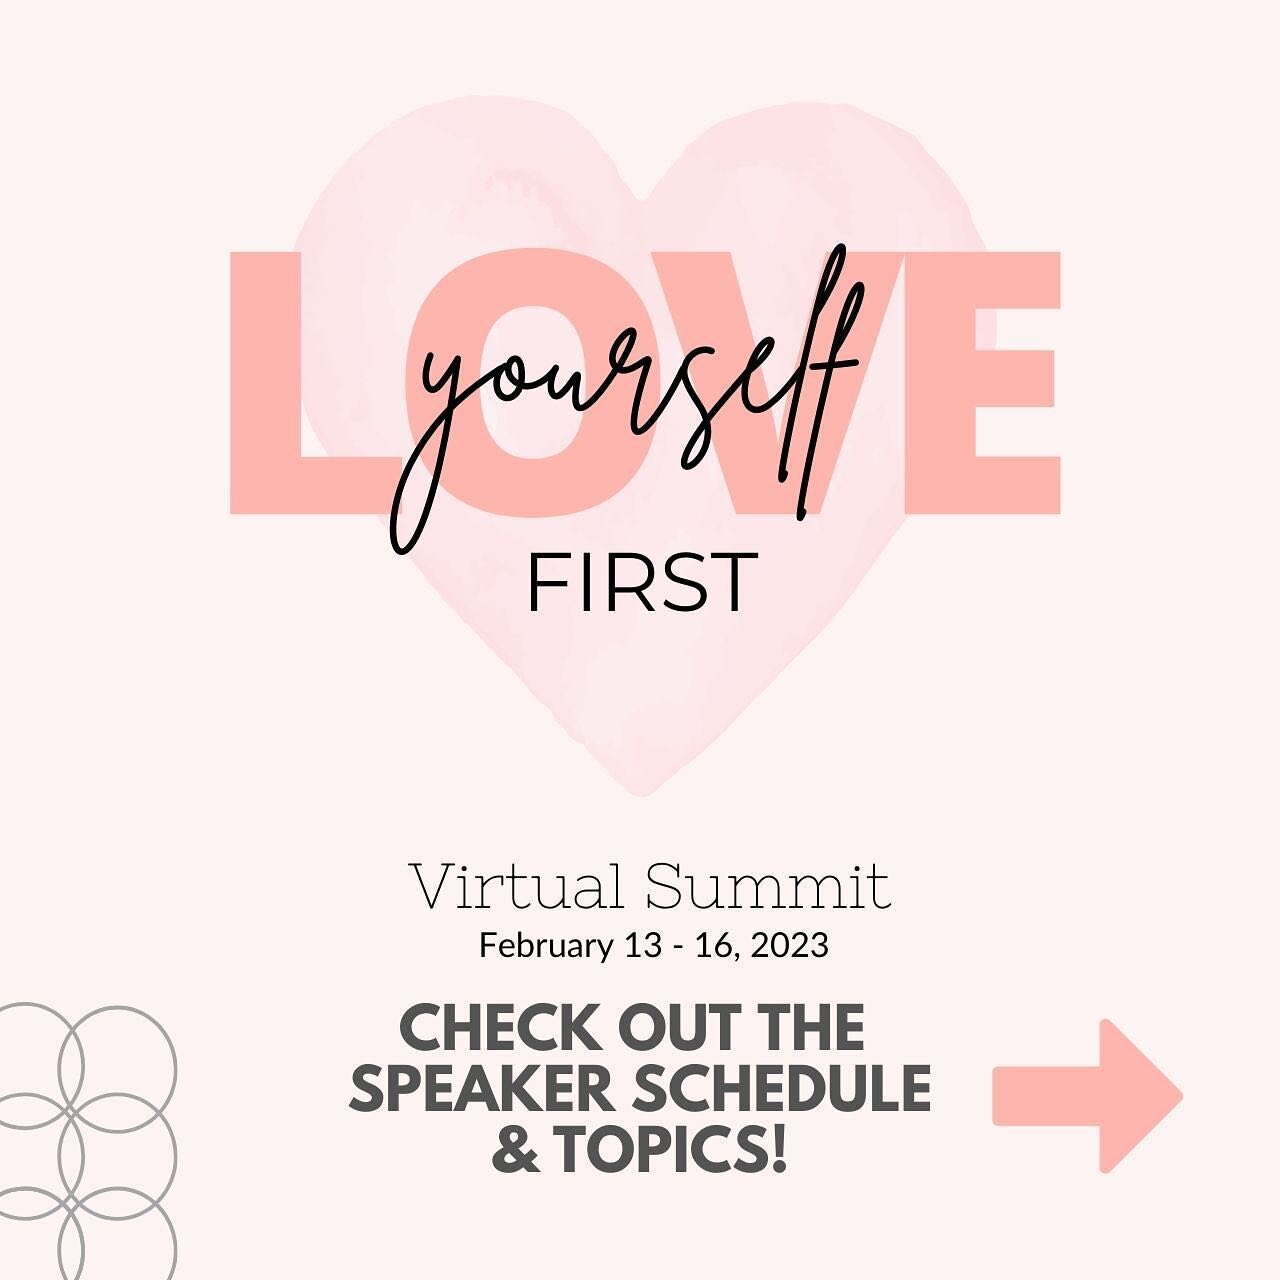 Check out the Love Yourself First Virtual Summit. Link to sign up in bio!